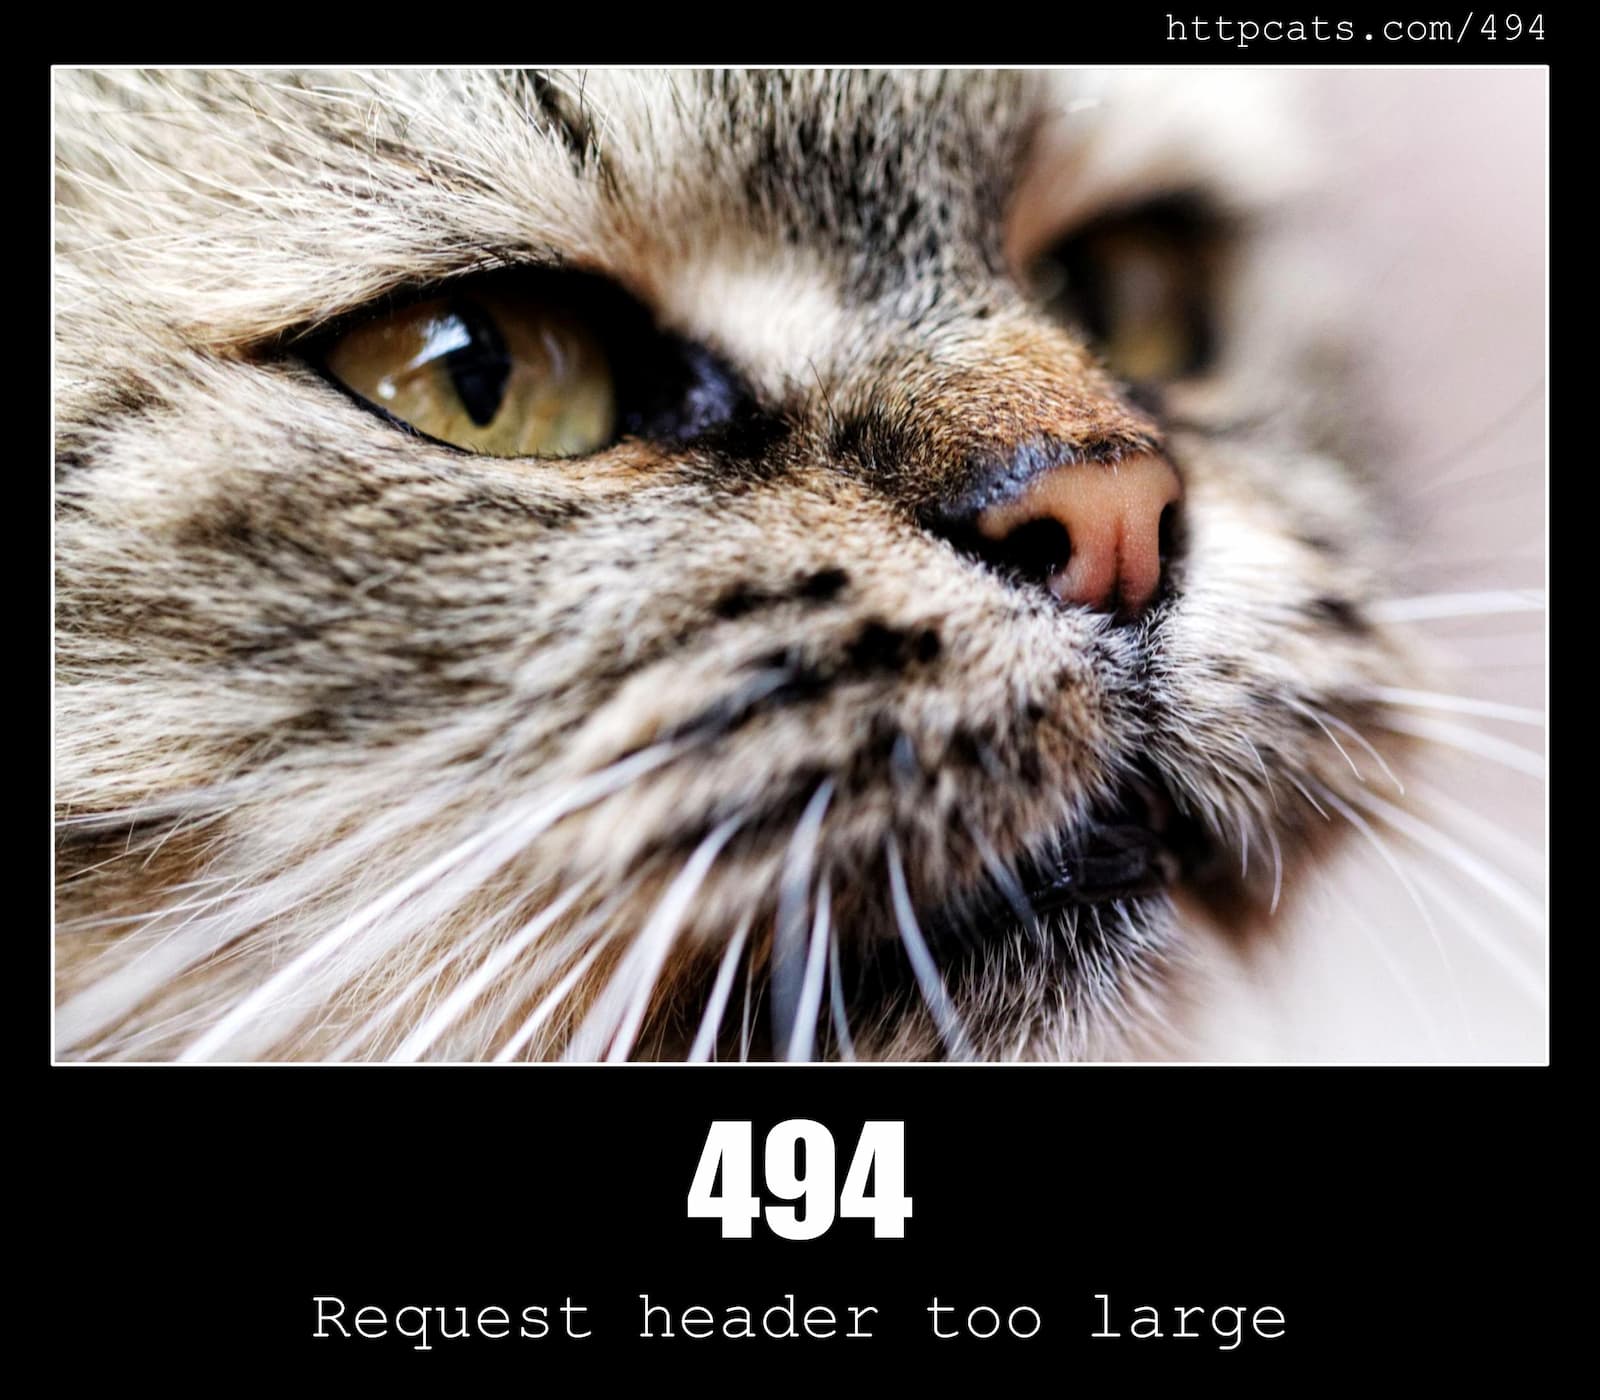 HTTP Status Code 494 Request header too large & Cats